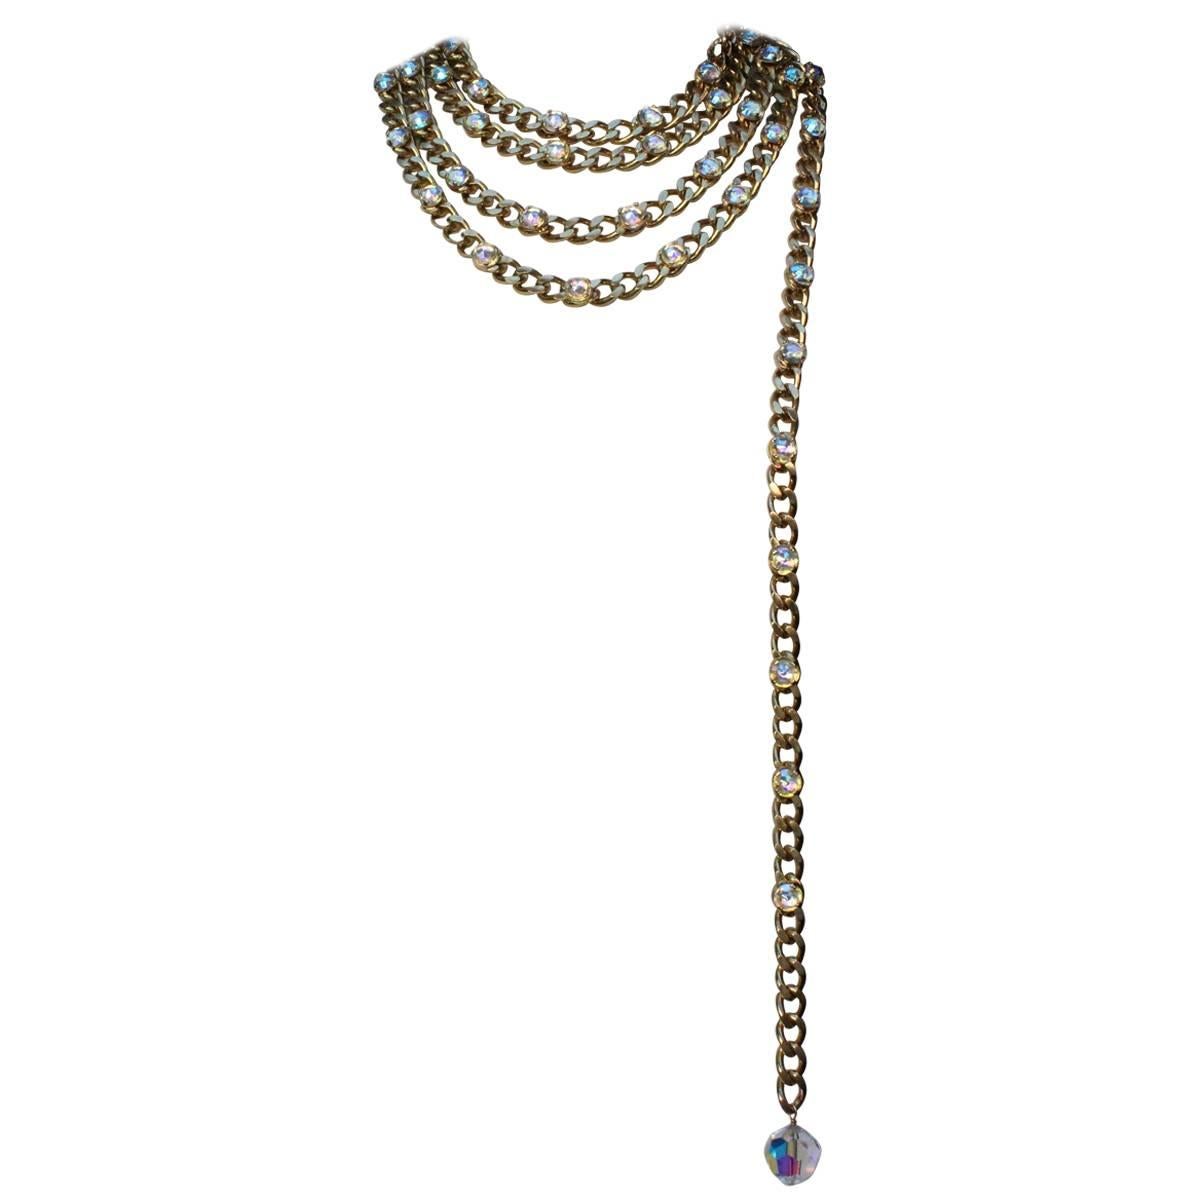 1990s Chanel gilded metal curb chain and rhinestones belt / necklace